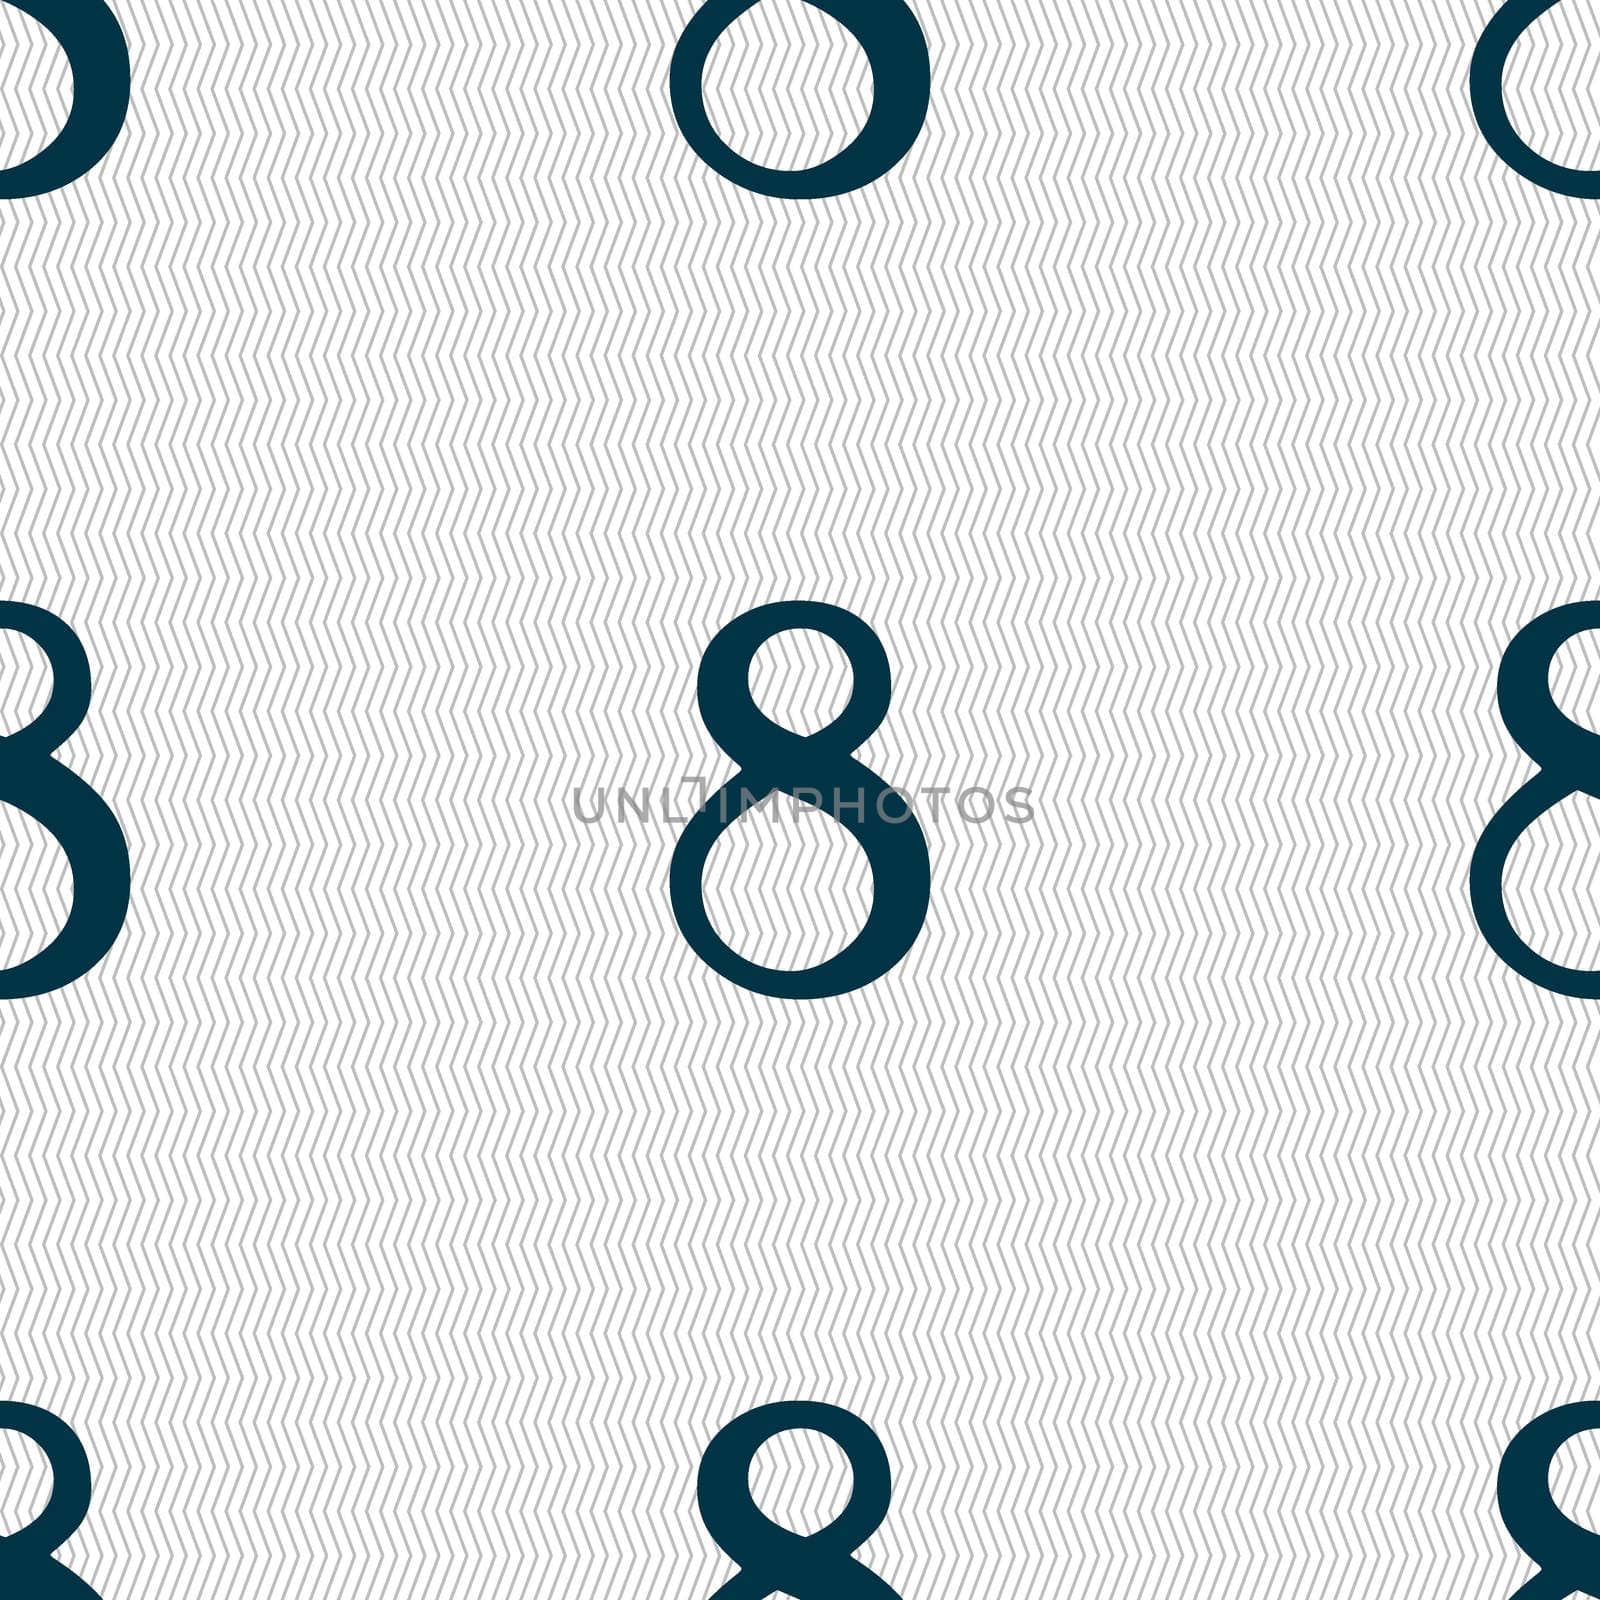 number Eight icon sign. Seamless abstract background with geometric shapes. illustration